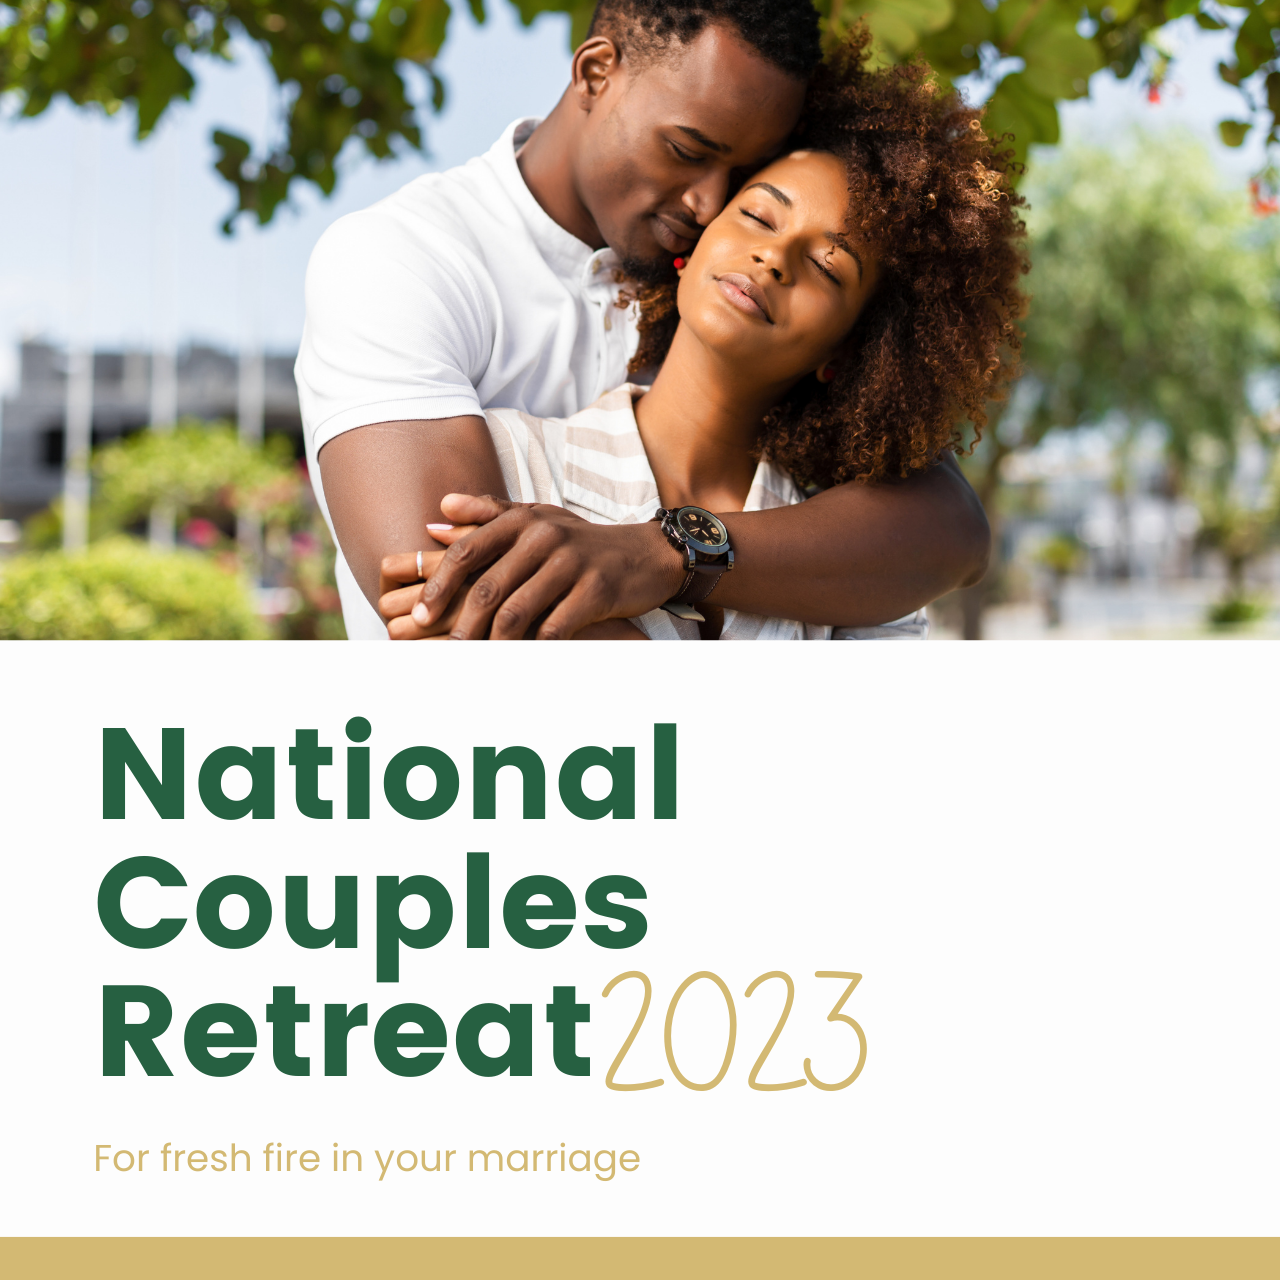 National Couples Retreat 2023